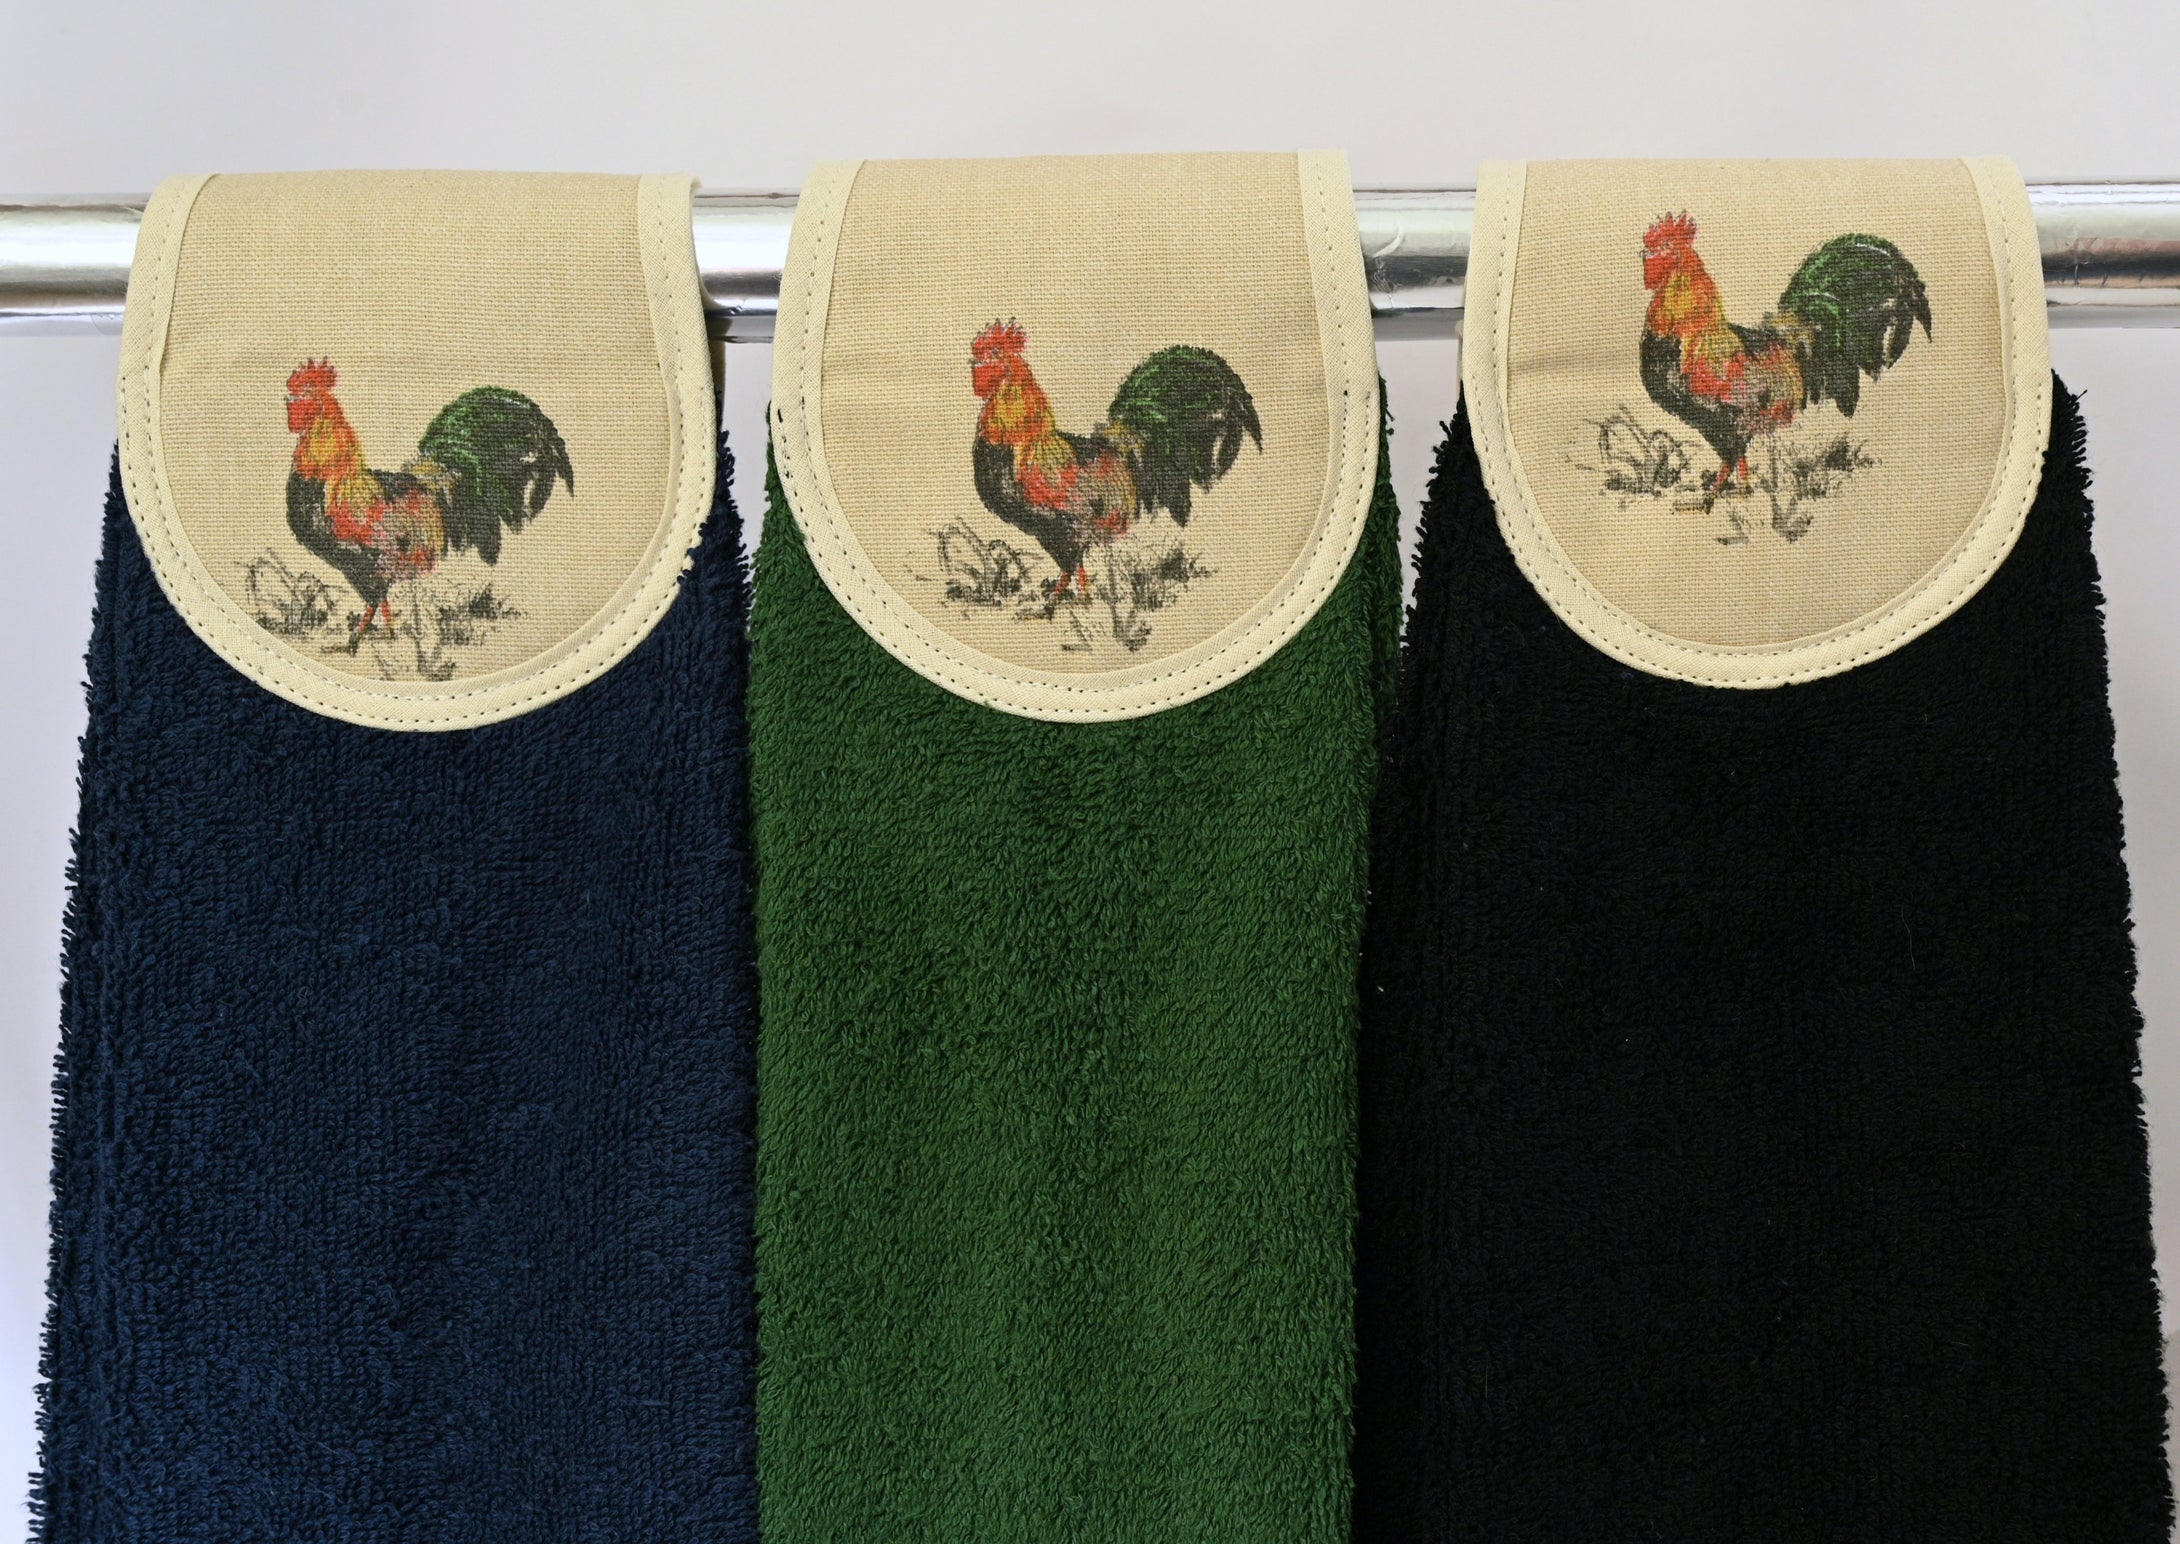 Hang ups, Kitchen towels, Cockerel with Green, Black or Navy Blue towel